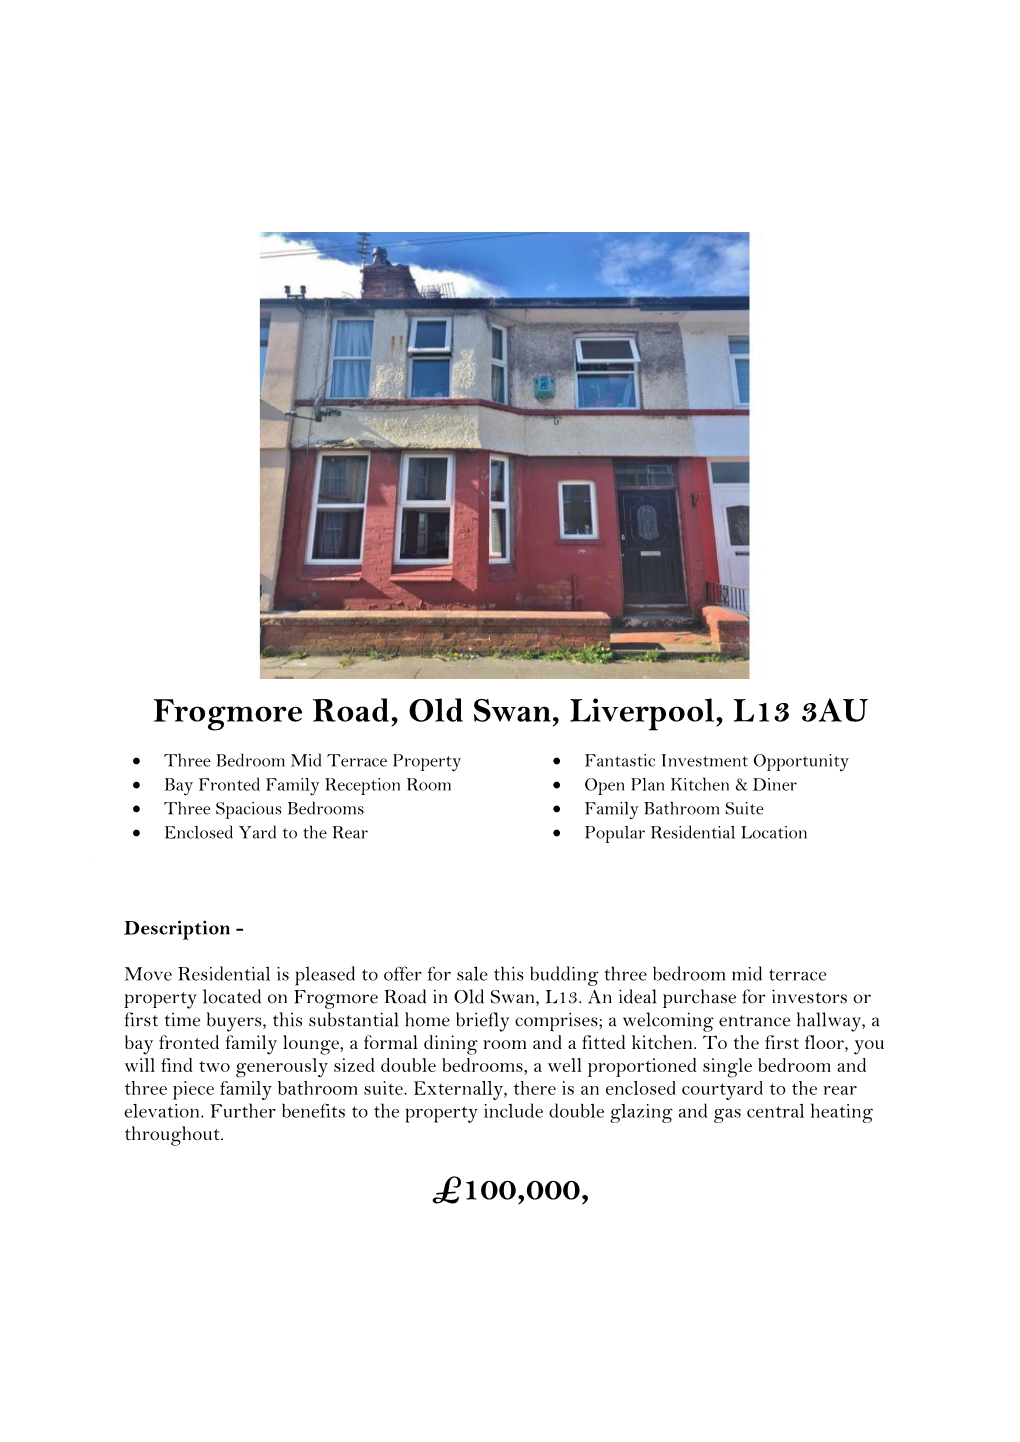 Frogmore Road, Old Swan, Liverpool, L13 3AU £100,000